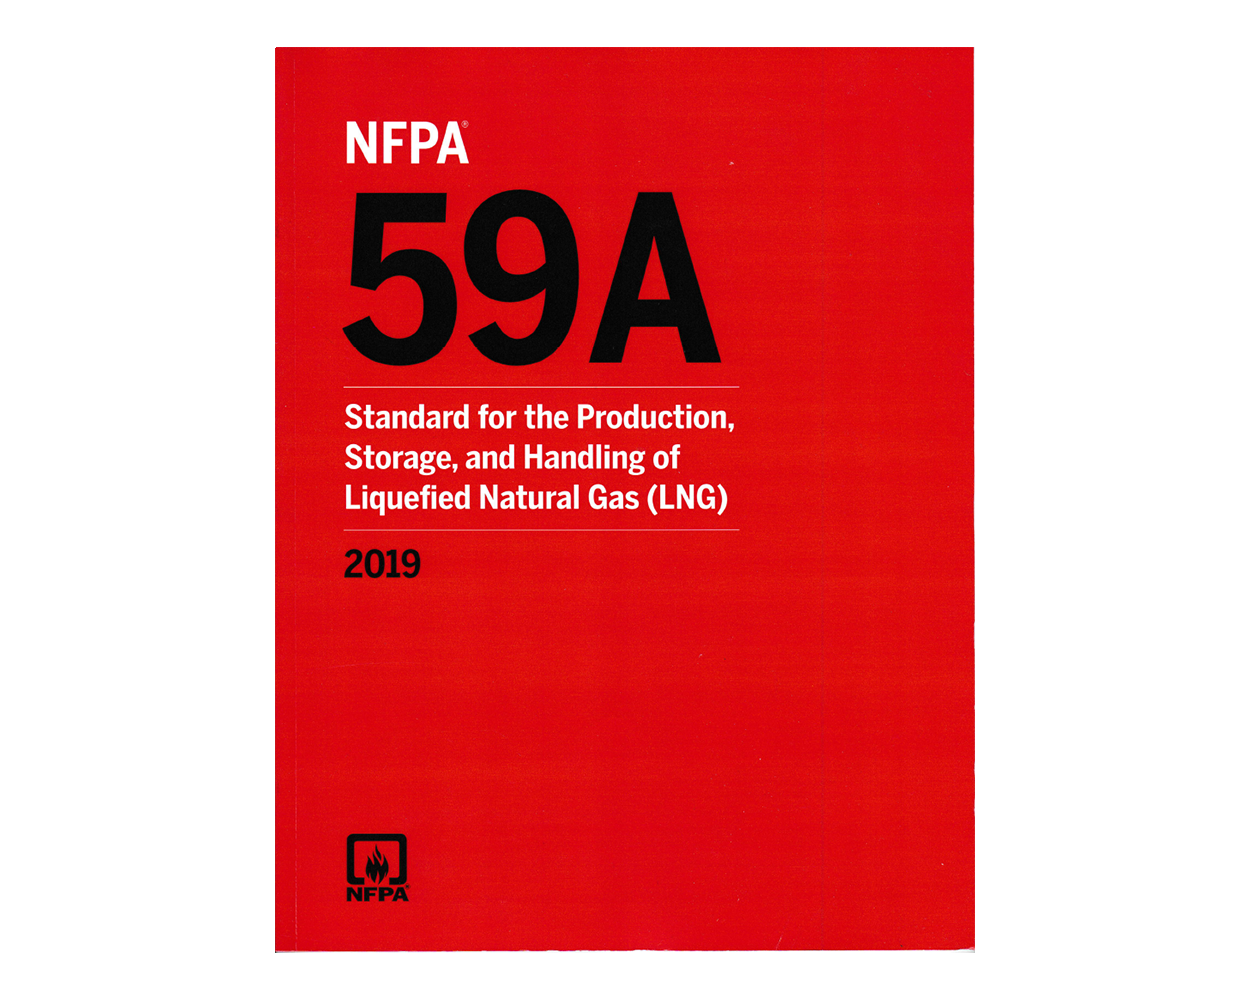 NFPA 59A, Standard for the Production, Storage, and Handling of